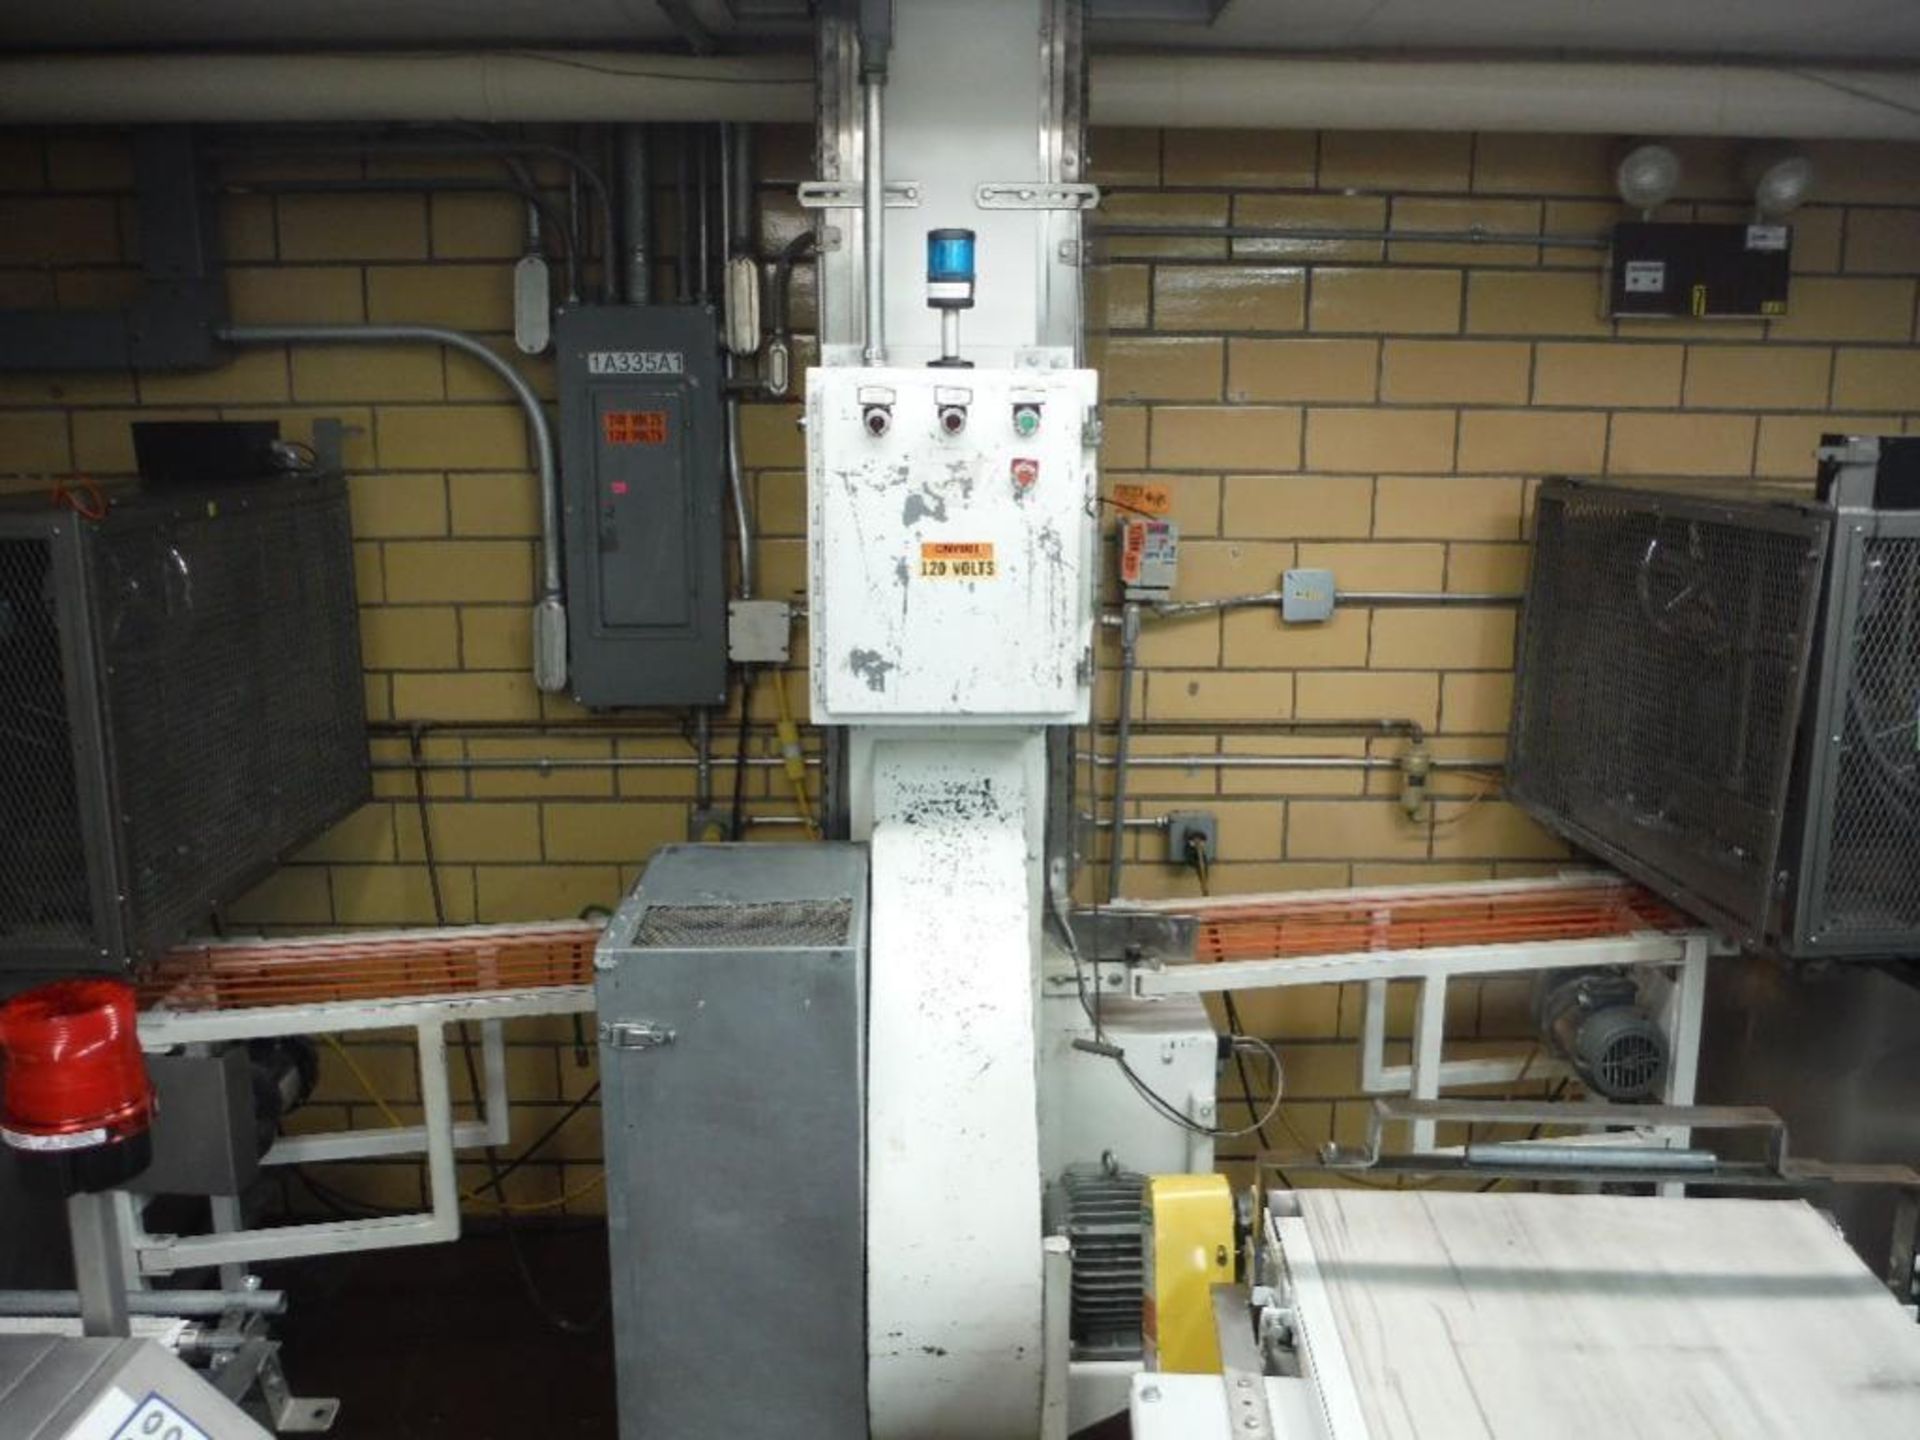 Pneumatic tray elevator, 80 ft. long x 10 ft. tall - Rigging Fee: $250